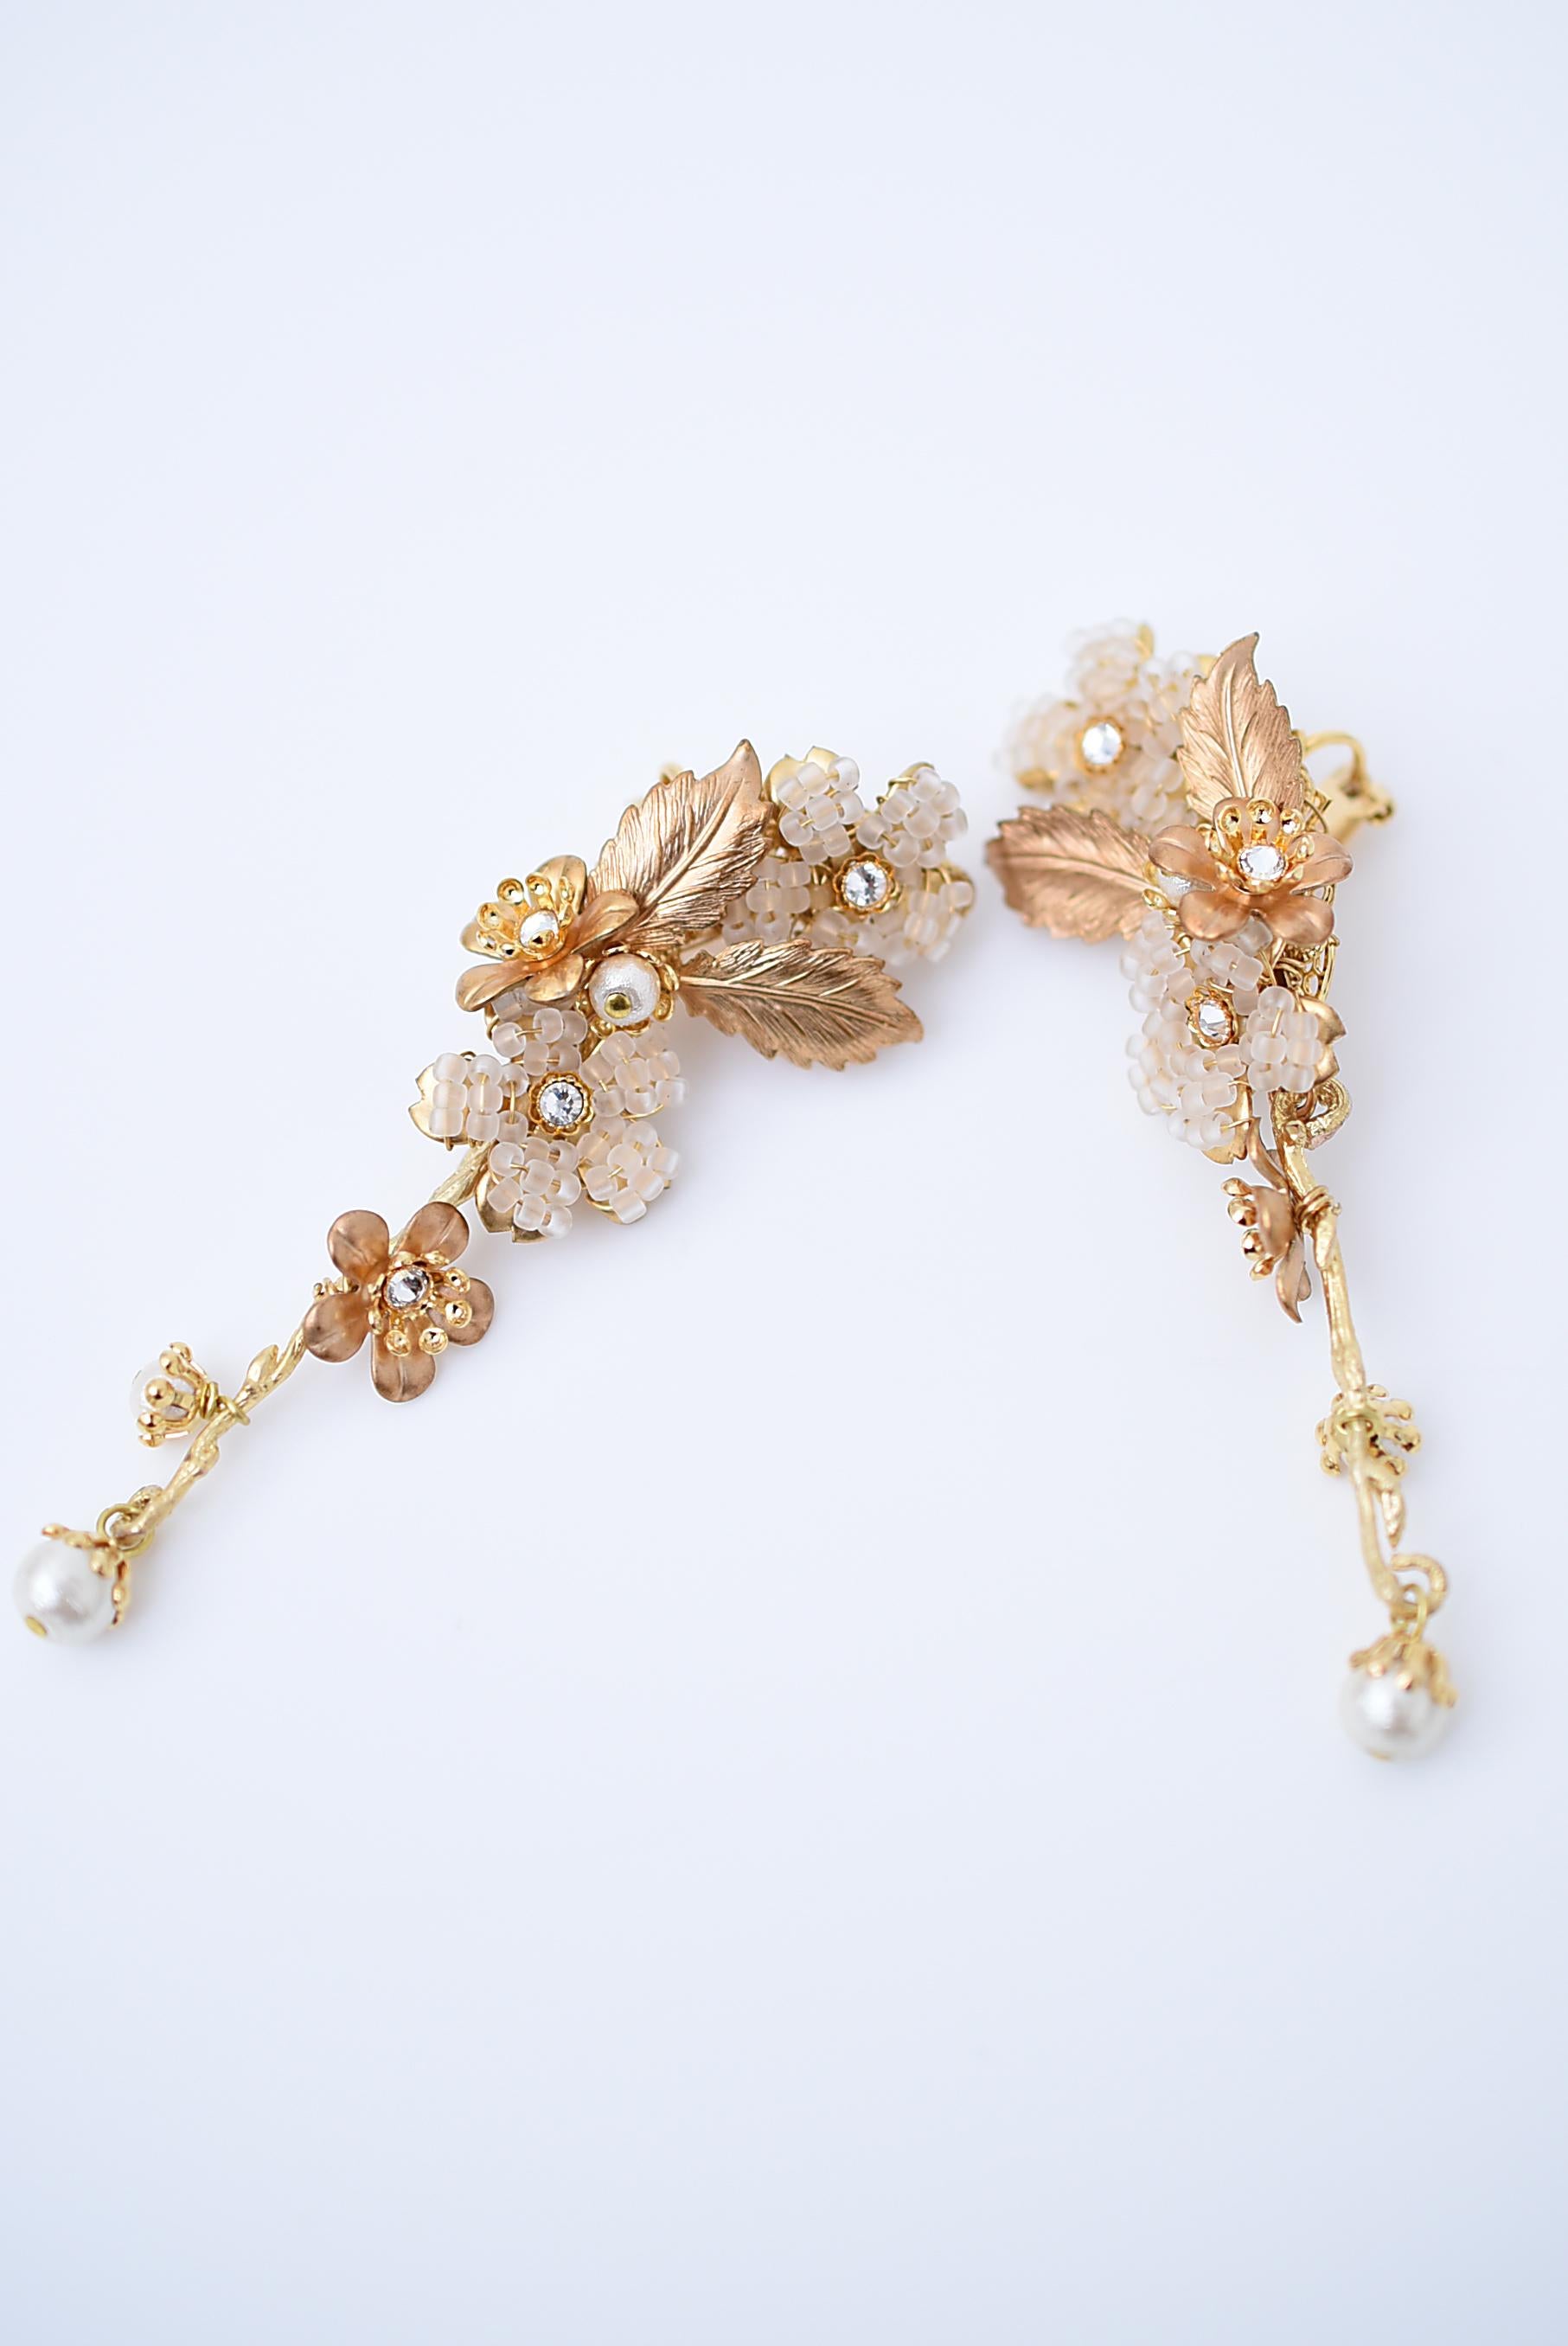 material:1970’s American vintage parts,glass beads,brass,cotton pearl,wood pearl,swarovski
size:length 6cm

Since it is a clip type, it is less likely to hurt your ears.
The cherry blossoms are snugly attached from halfway down your ear, and the